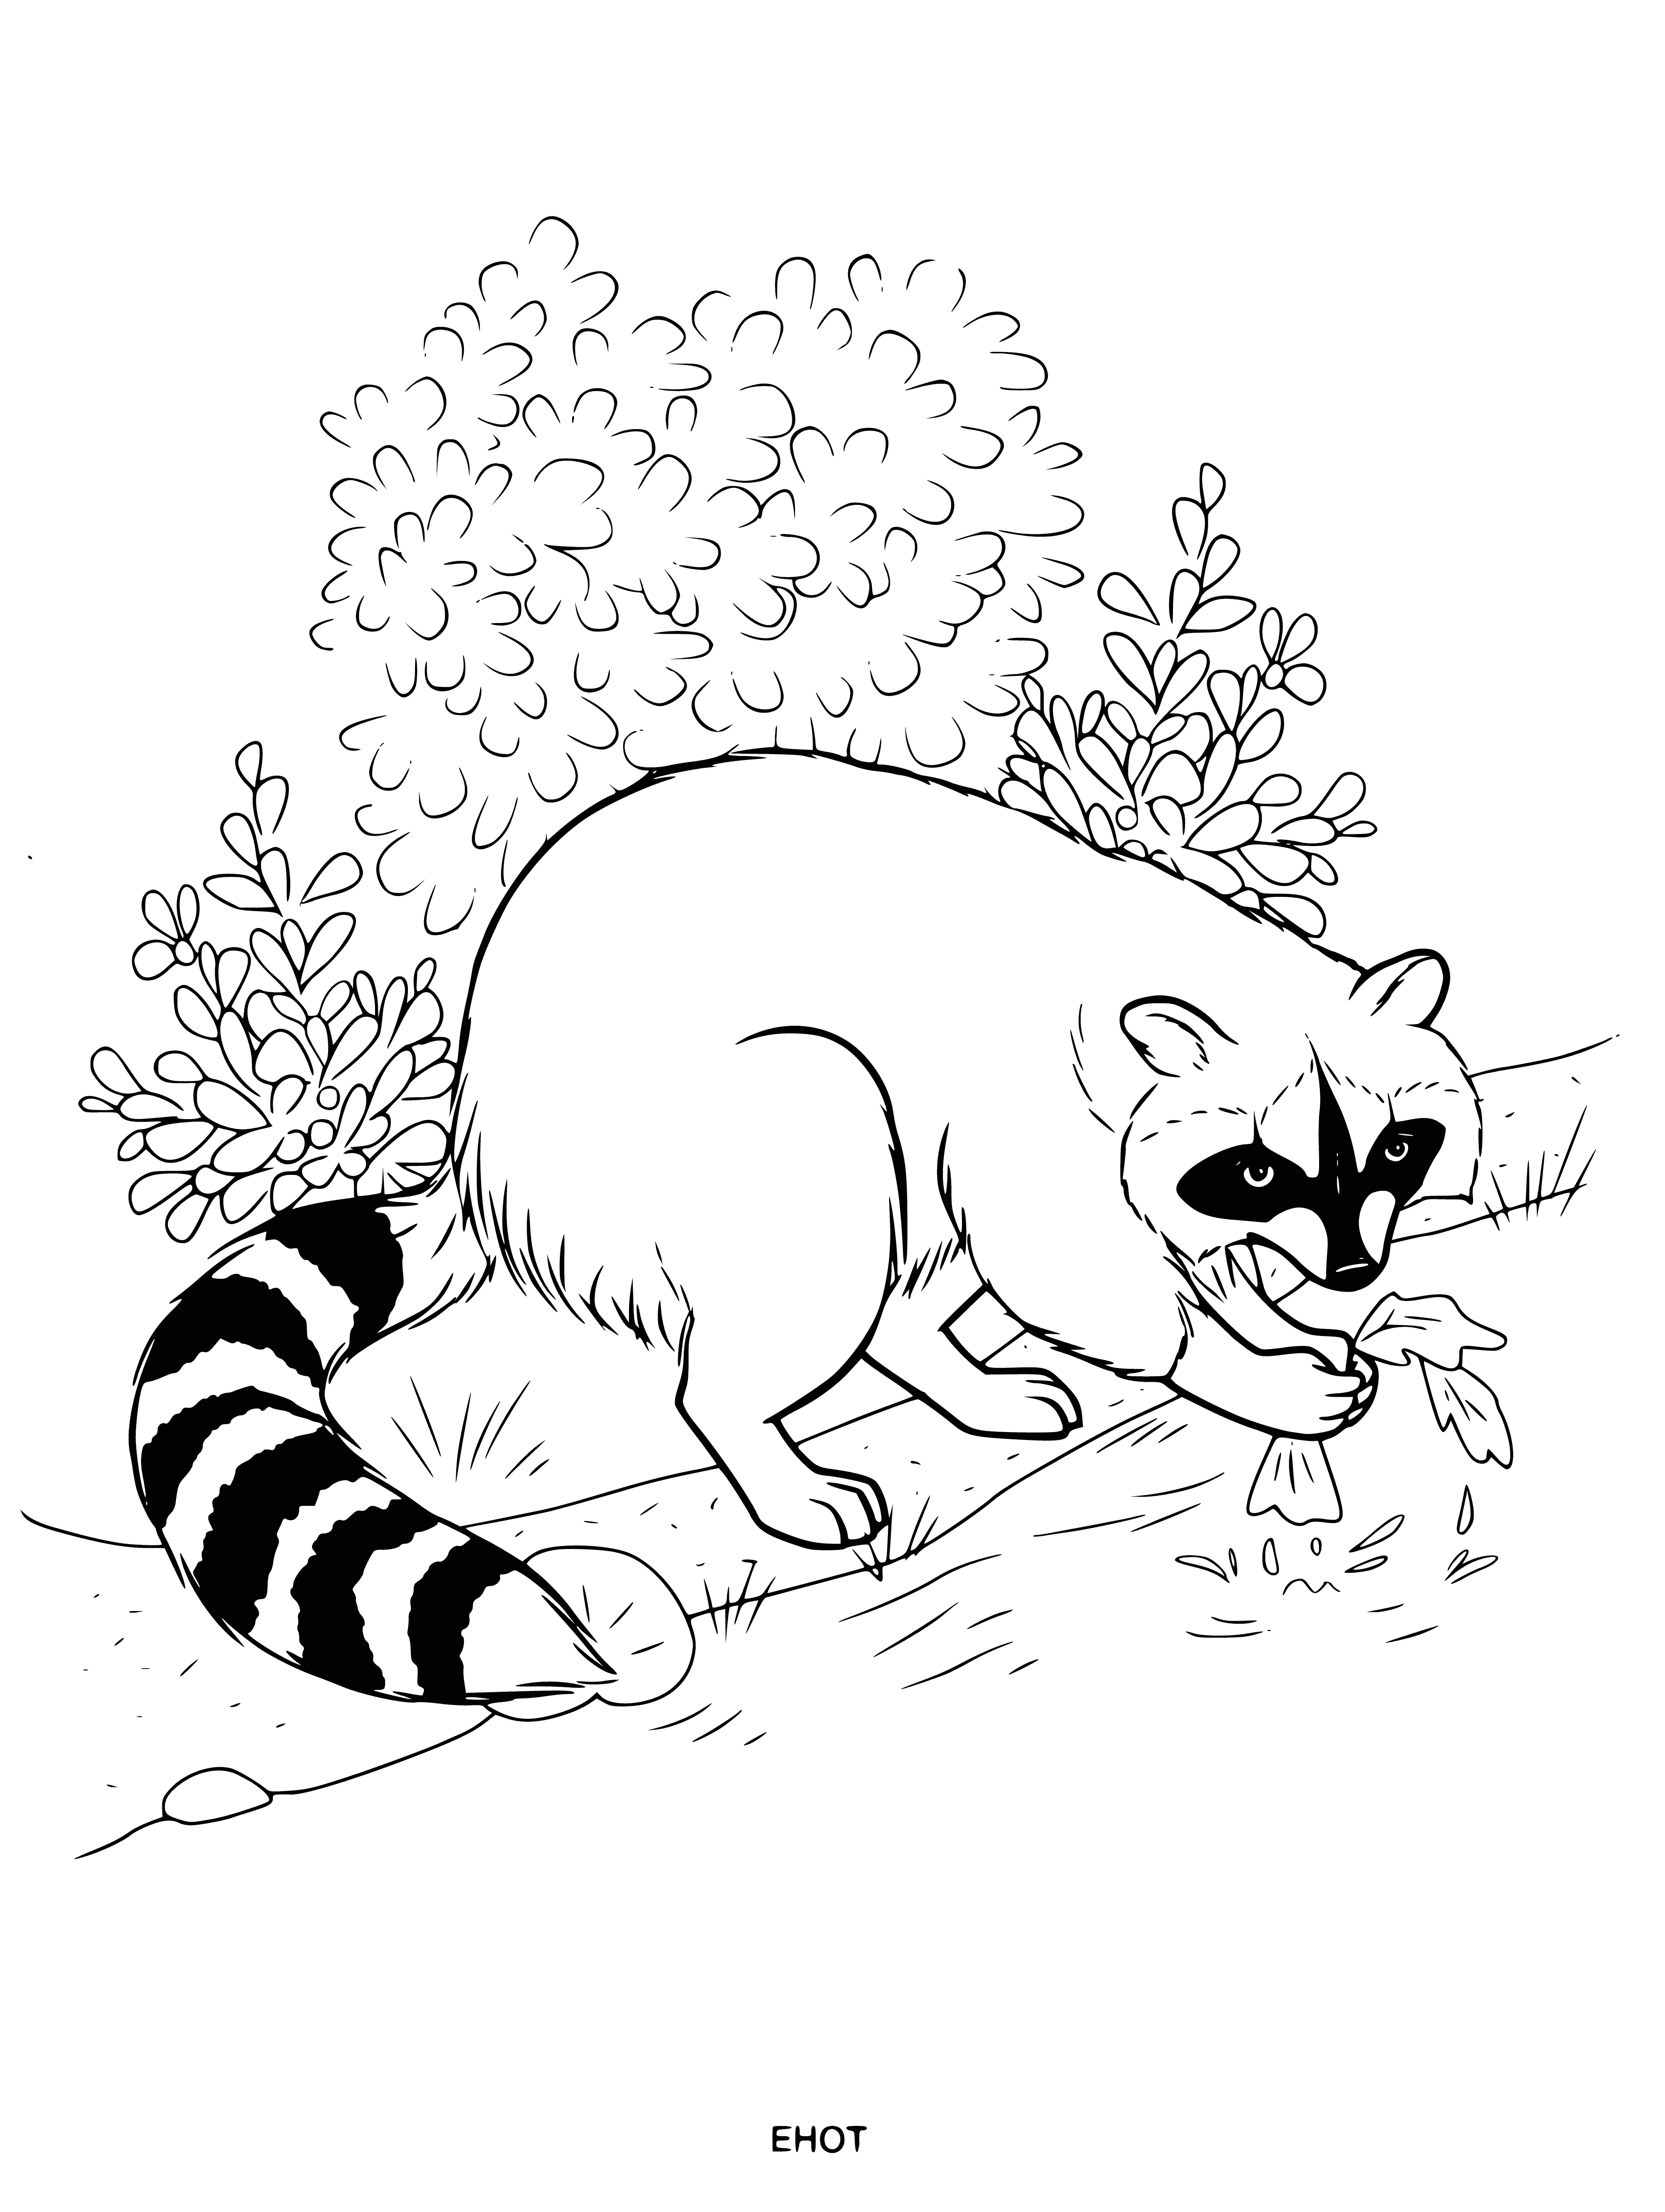 Enot coloring page